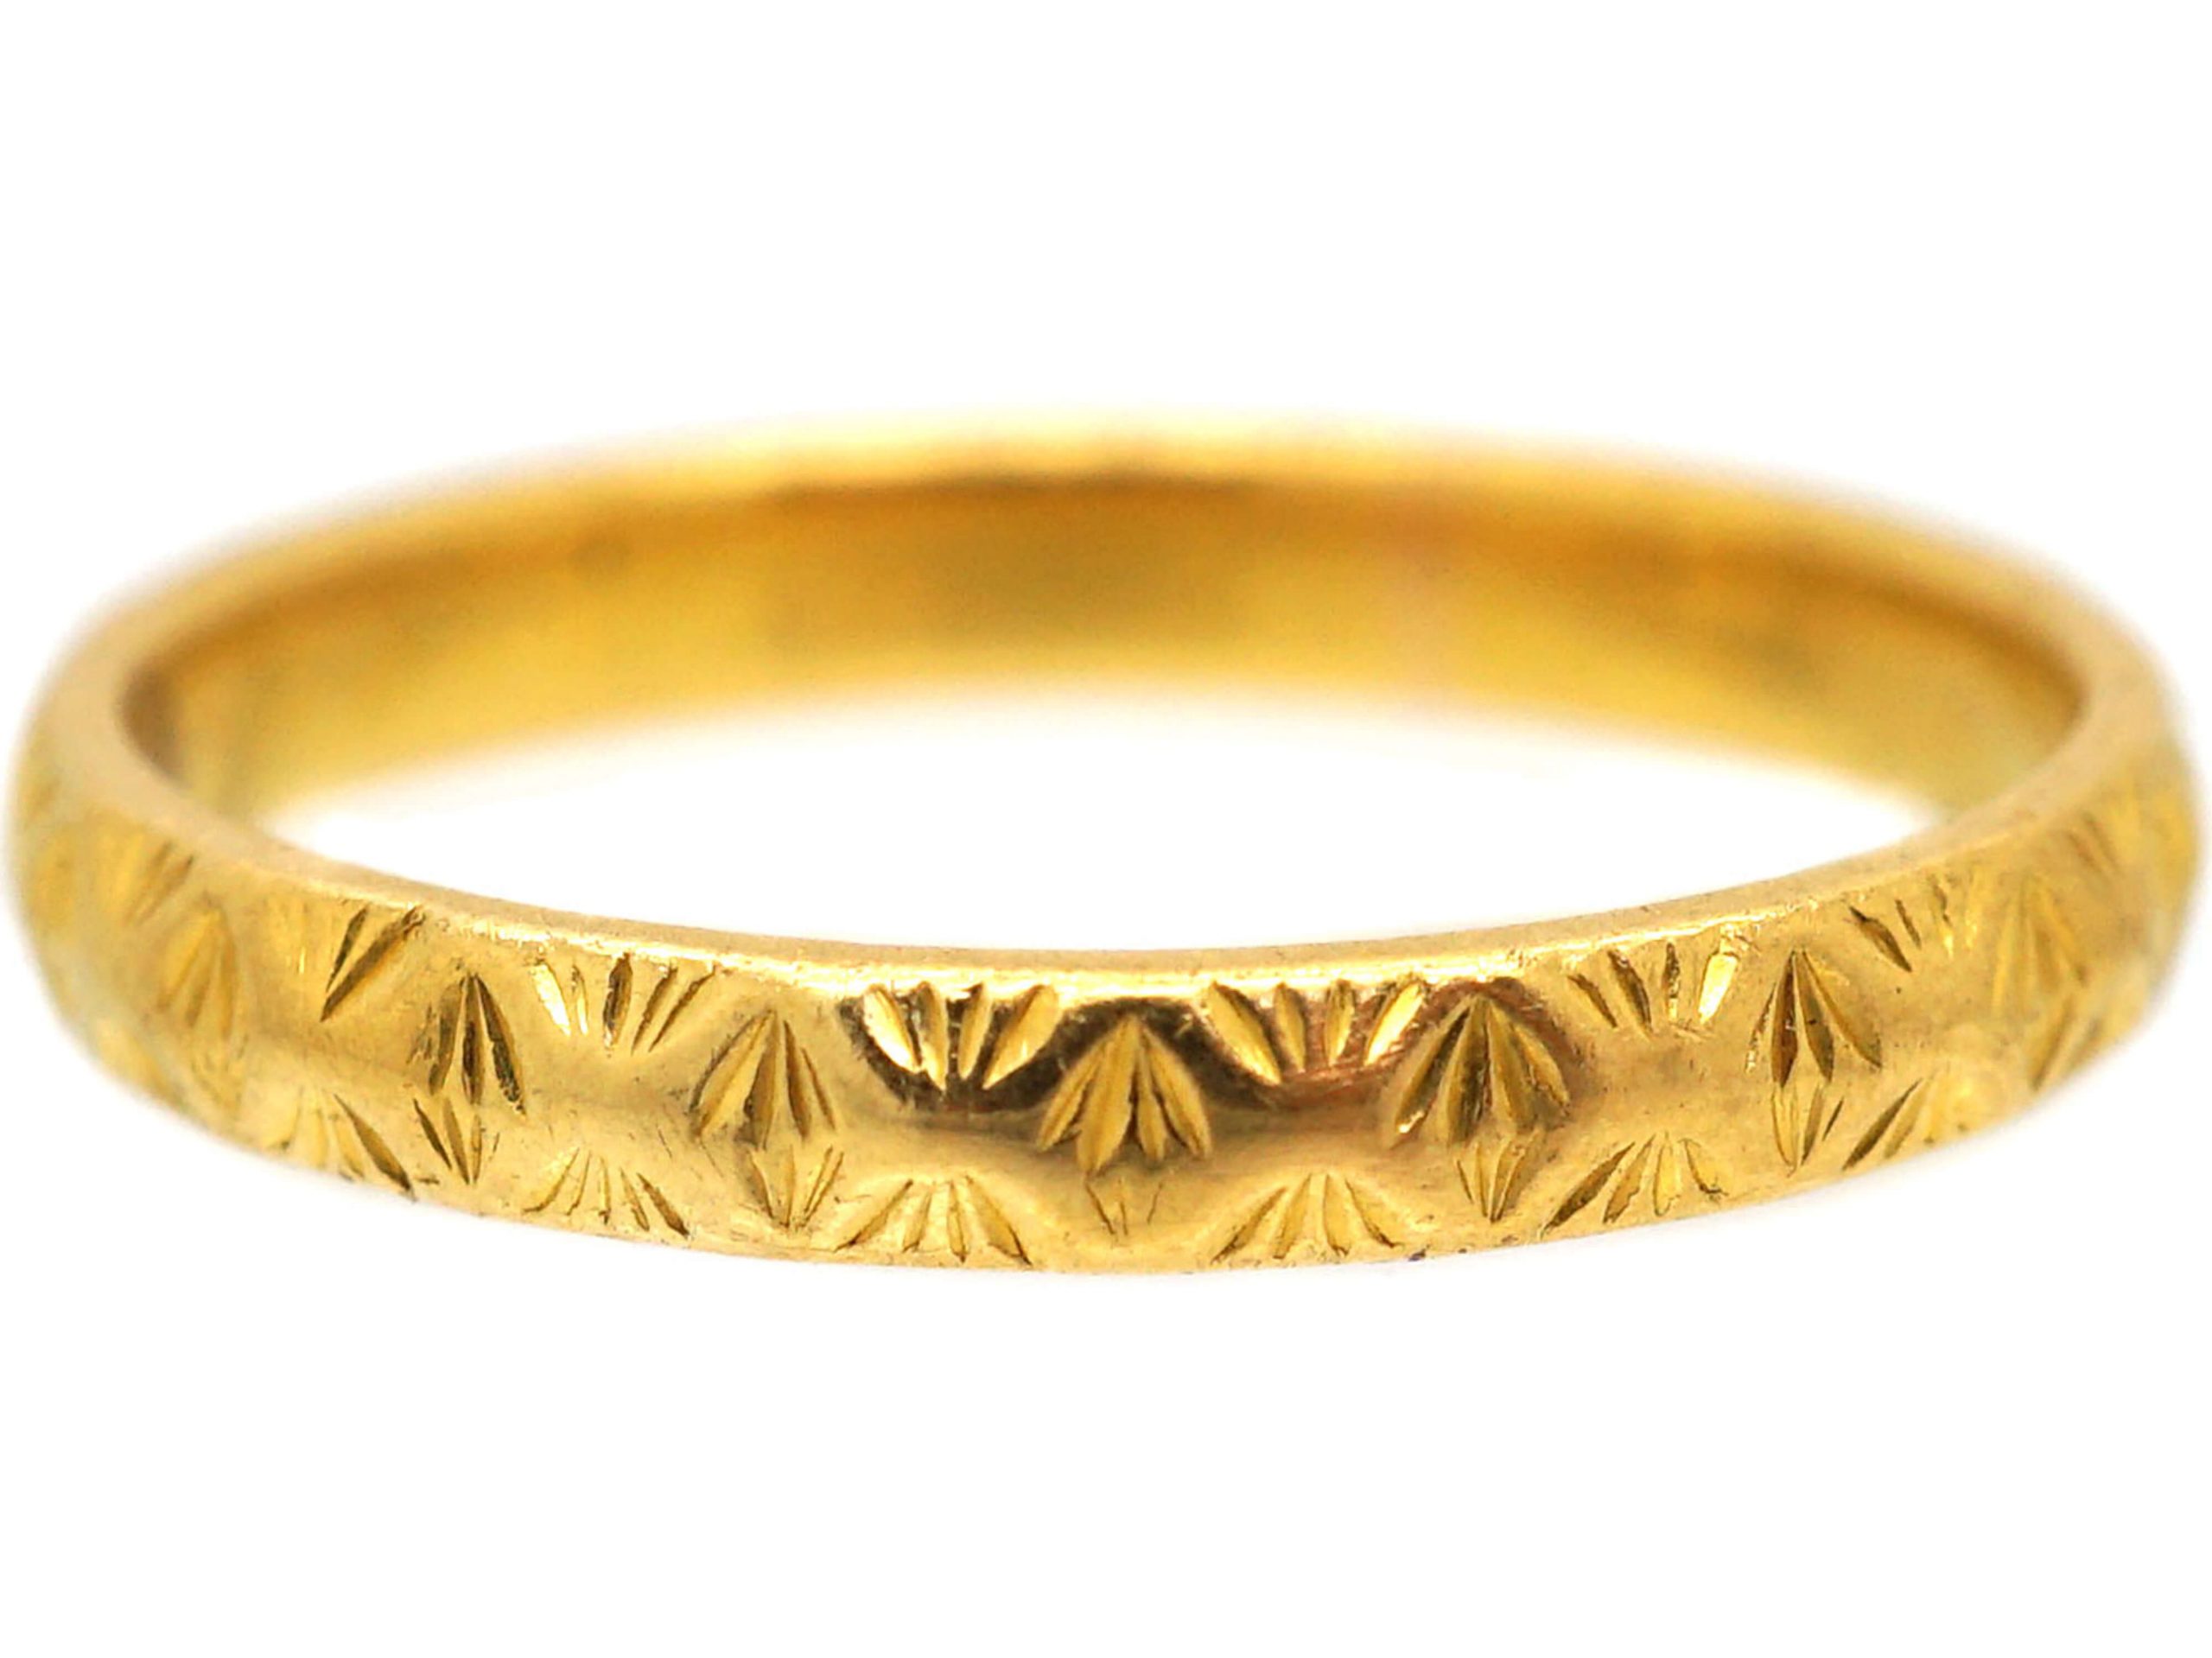 Art Deco 22ct Gold Wedding Ring with Ornate Decoration (32S) | The